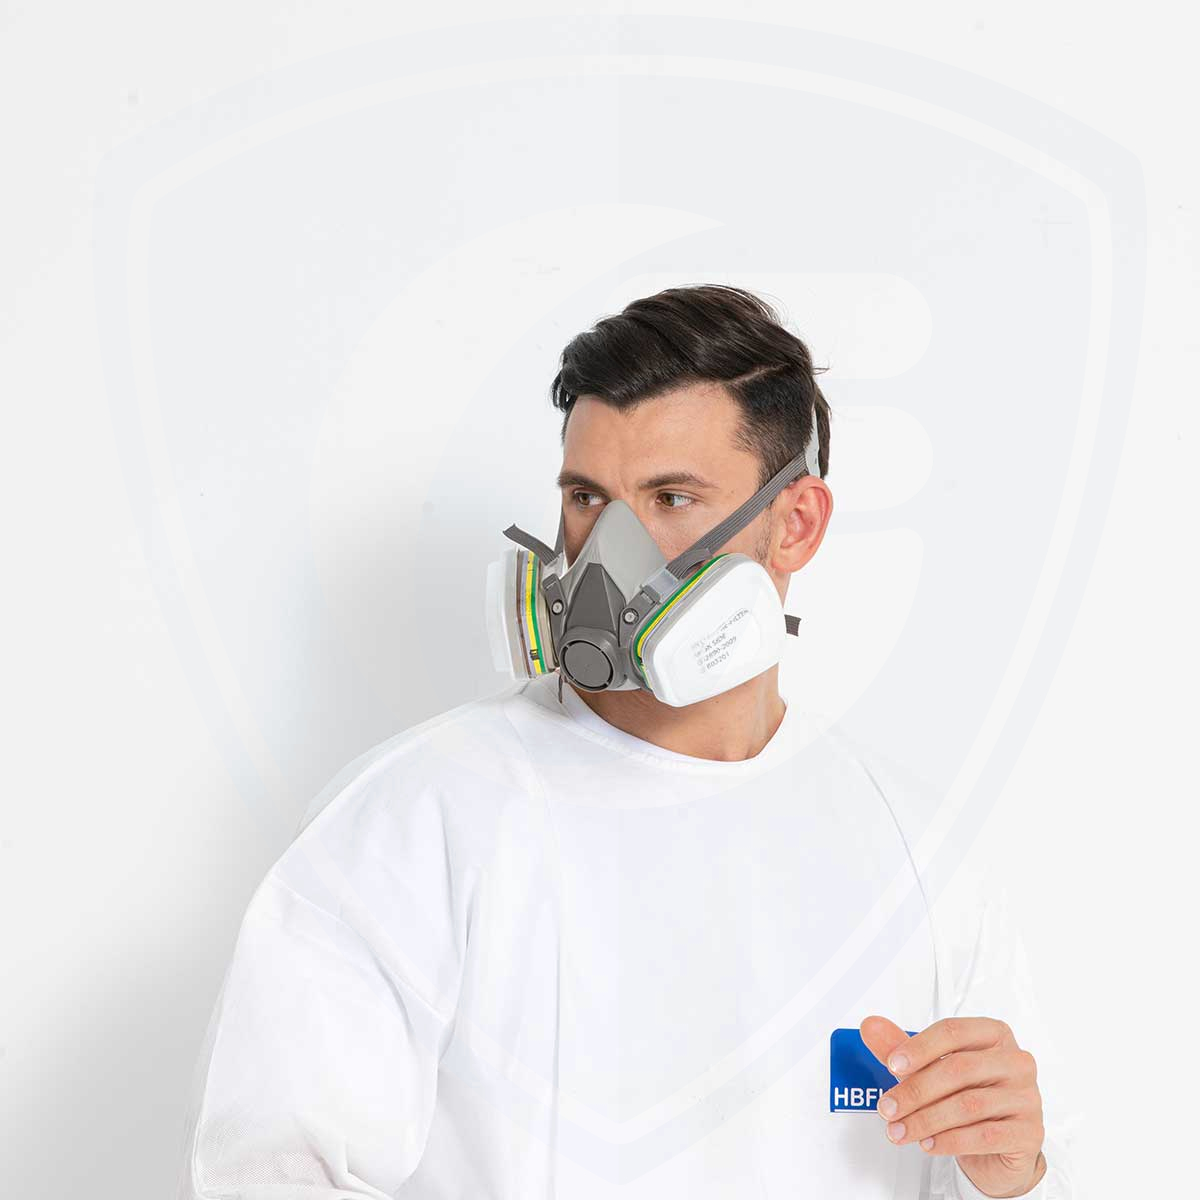  6200 Reusable Half Mask Respirator Spray Mask for Spraying Painting.Chemical Machine Polishing.Welding. Woodworking And Other Work Protection 